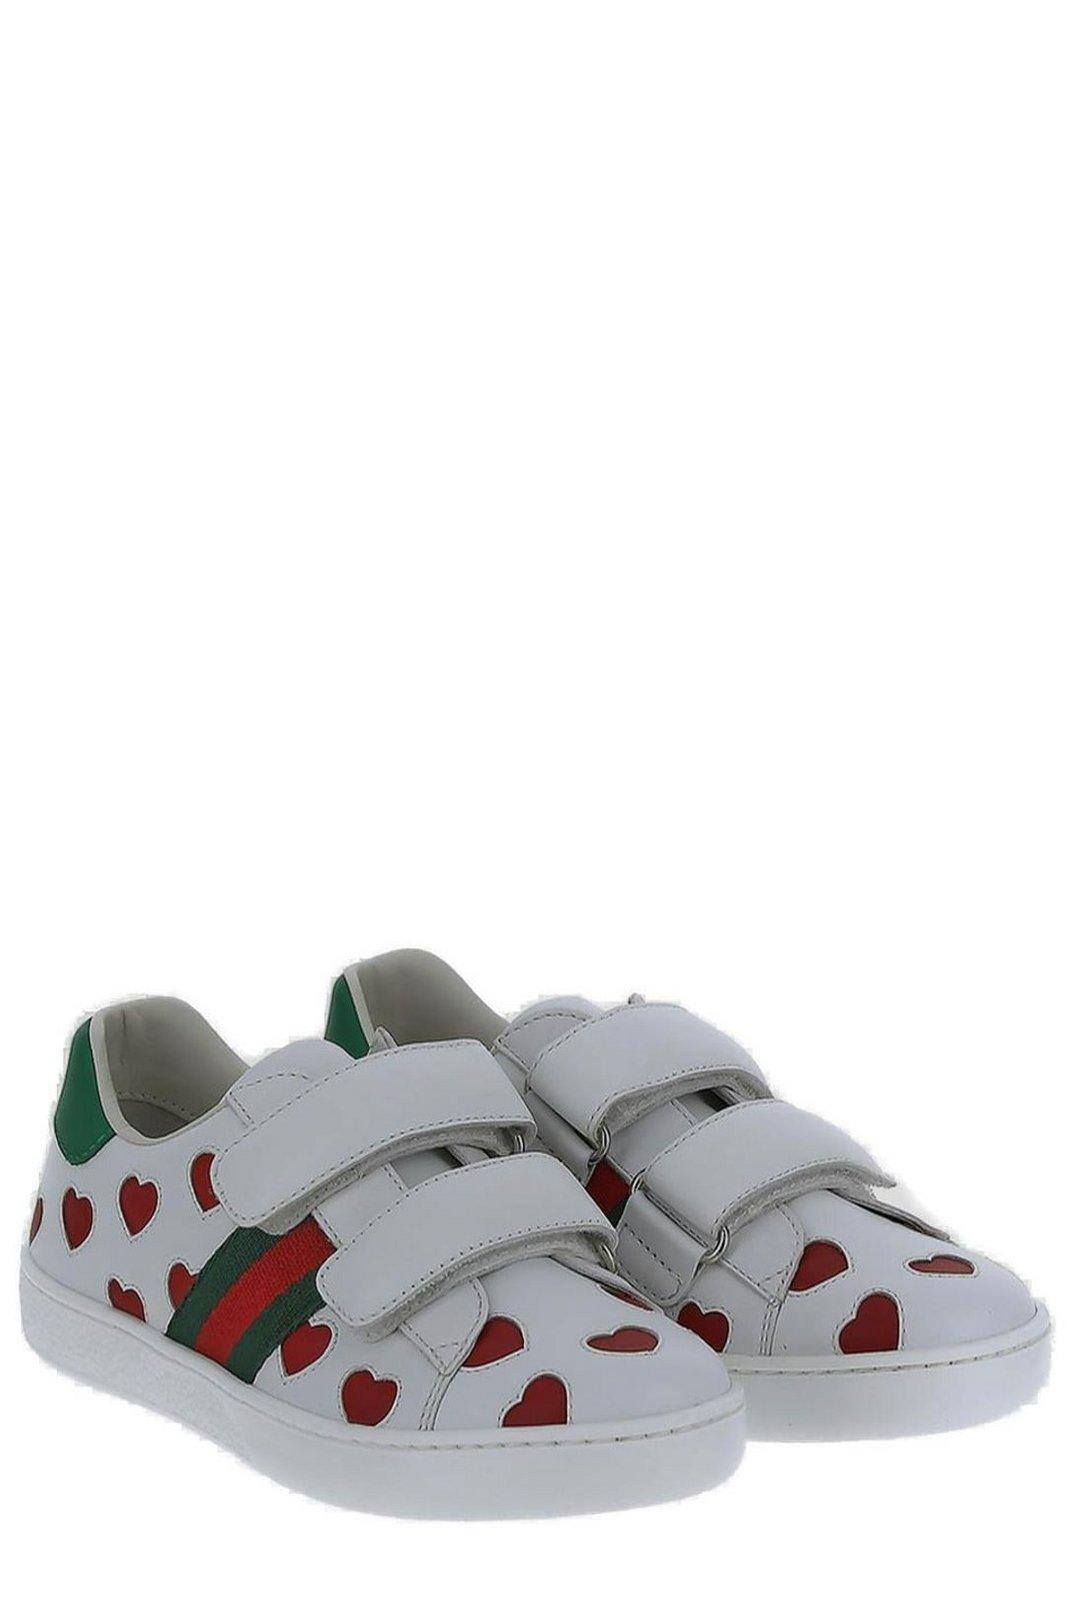 Gucci Heart Printed Touch-strapped Sneakers